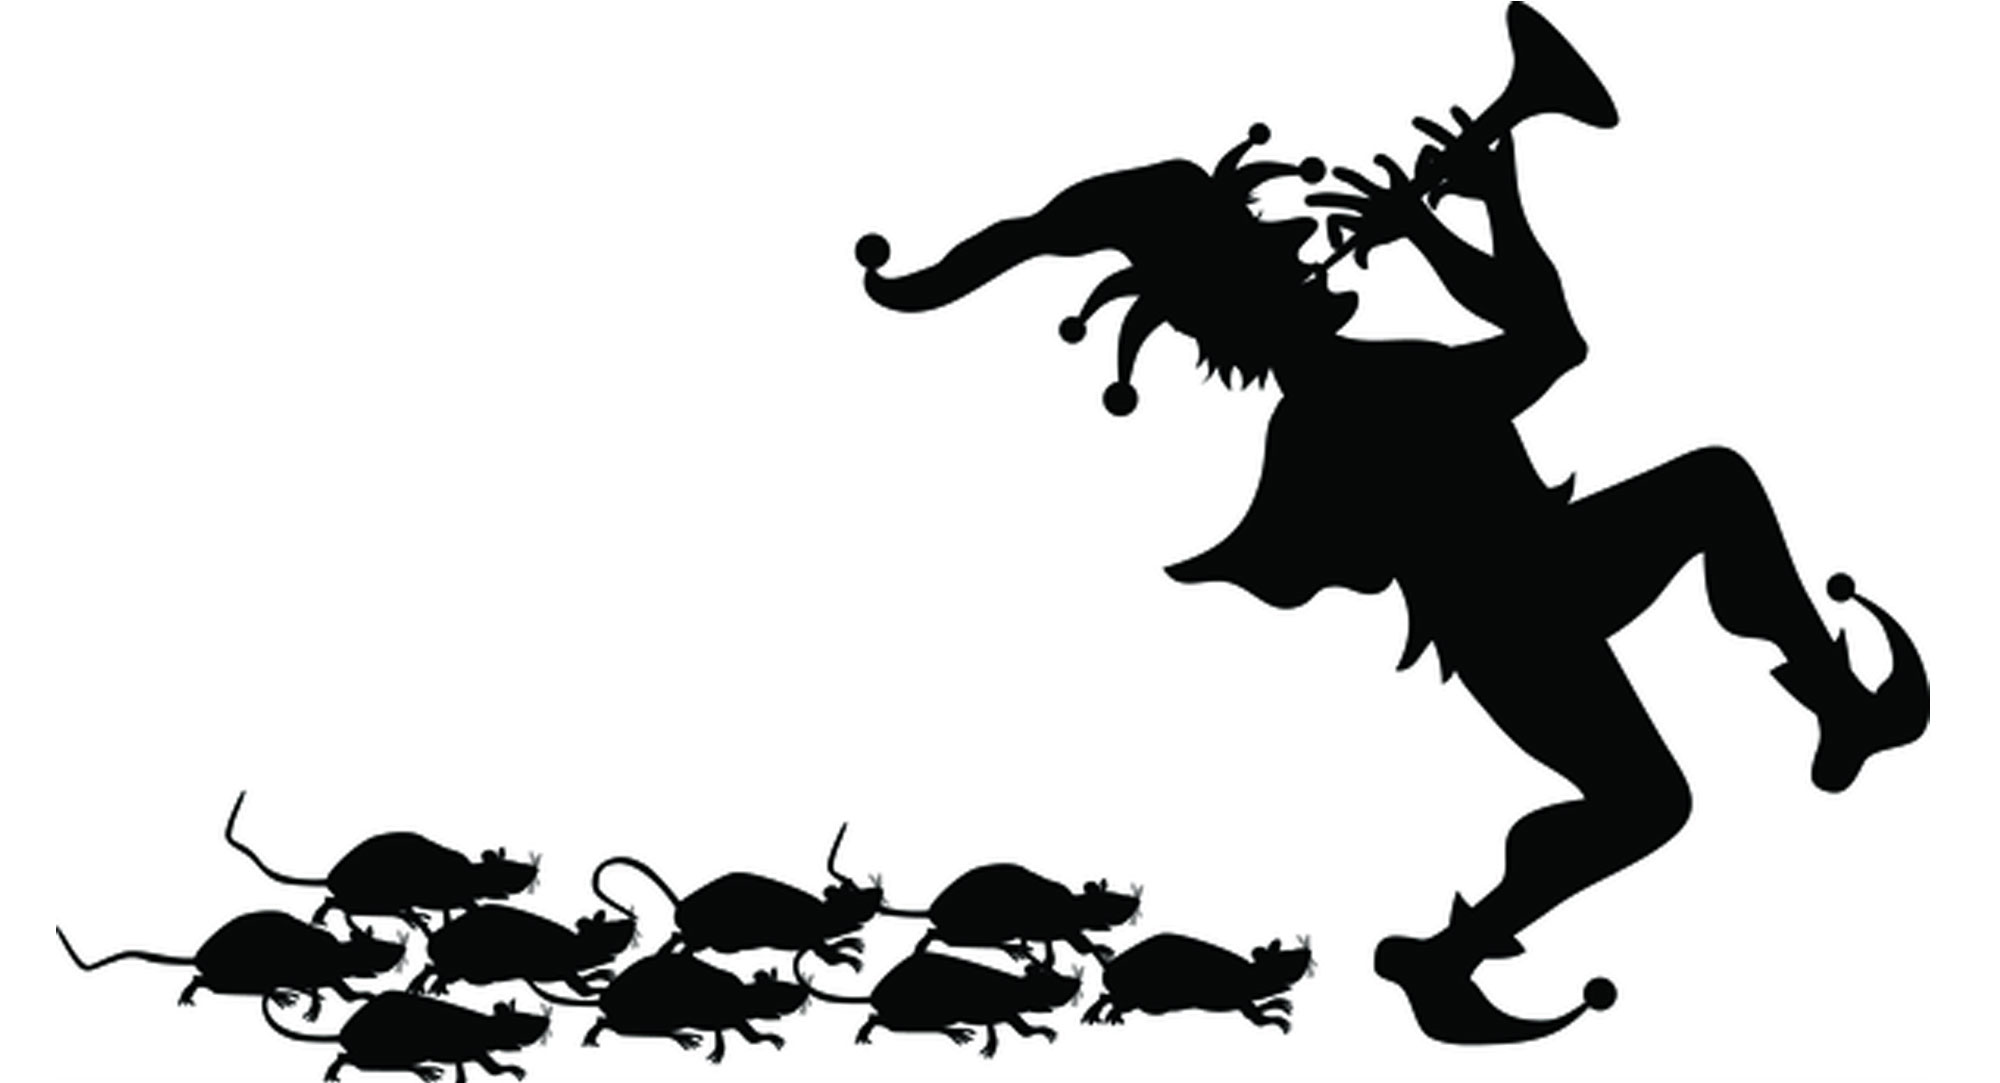 Pied Piper phishing infects with FlawedAmmyy, RMS RATs | SC Media